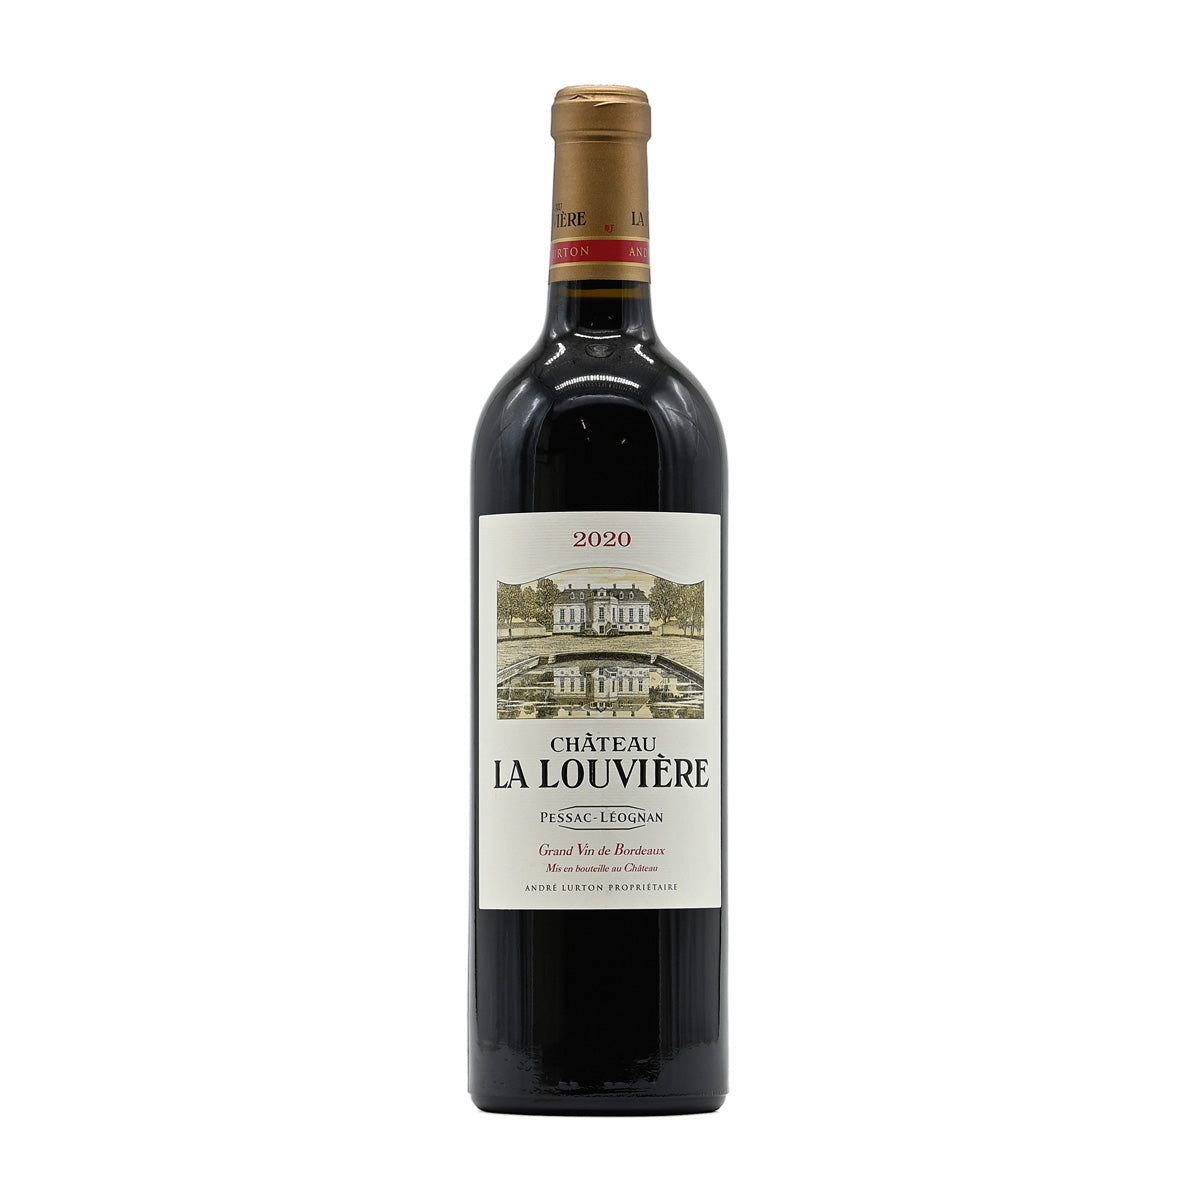 Chateau La Louviere 2020, Grand Vin de Graves, 750ml French red wine, by Andre Lurton, from Pessac Leognan, Bordeaux, France – GDV Fine Wines, Hong Kong